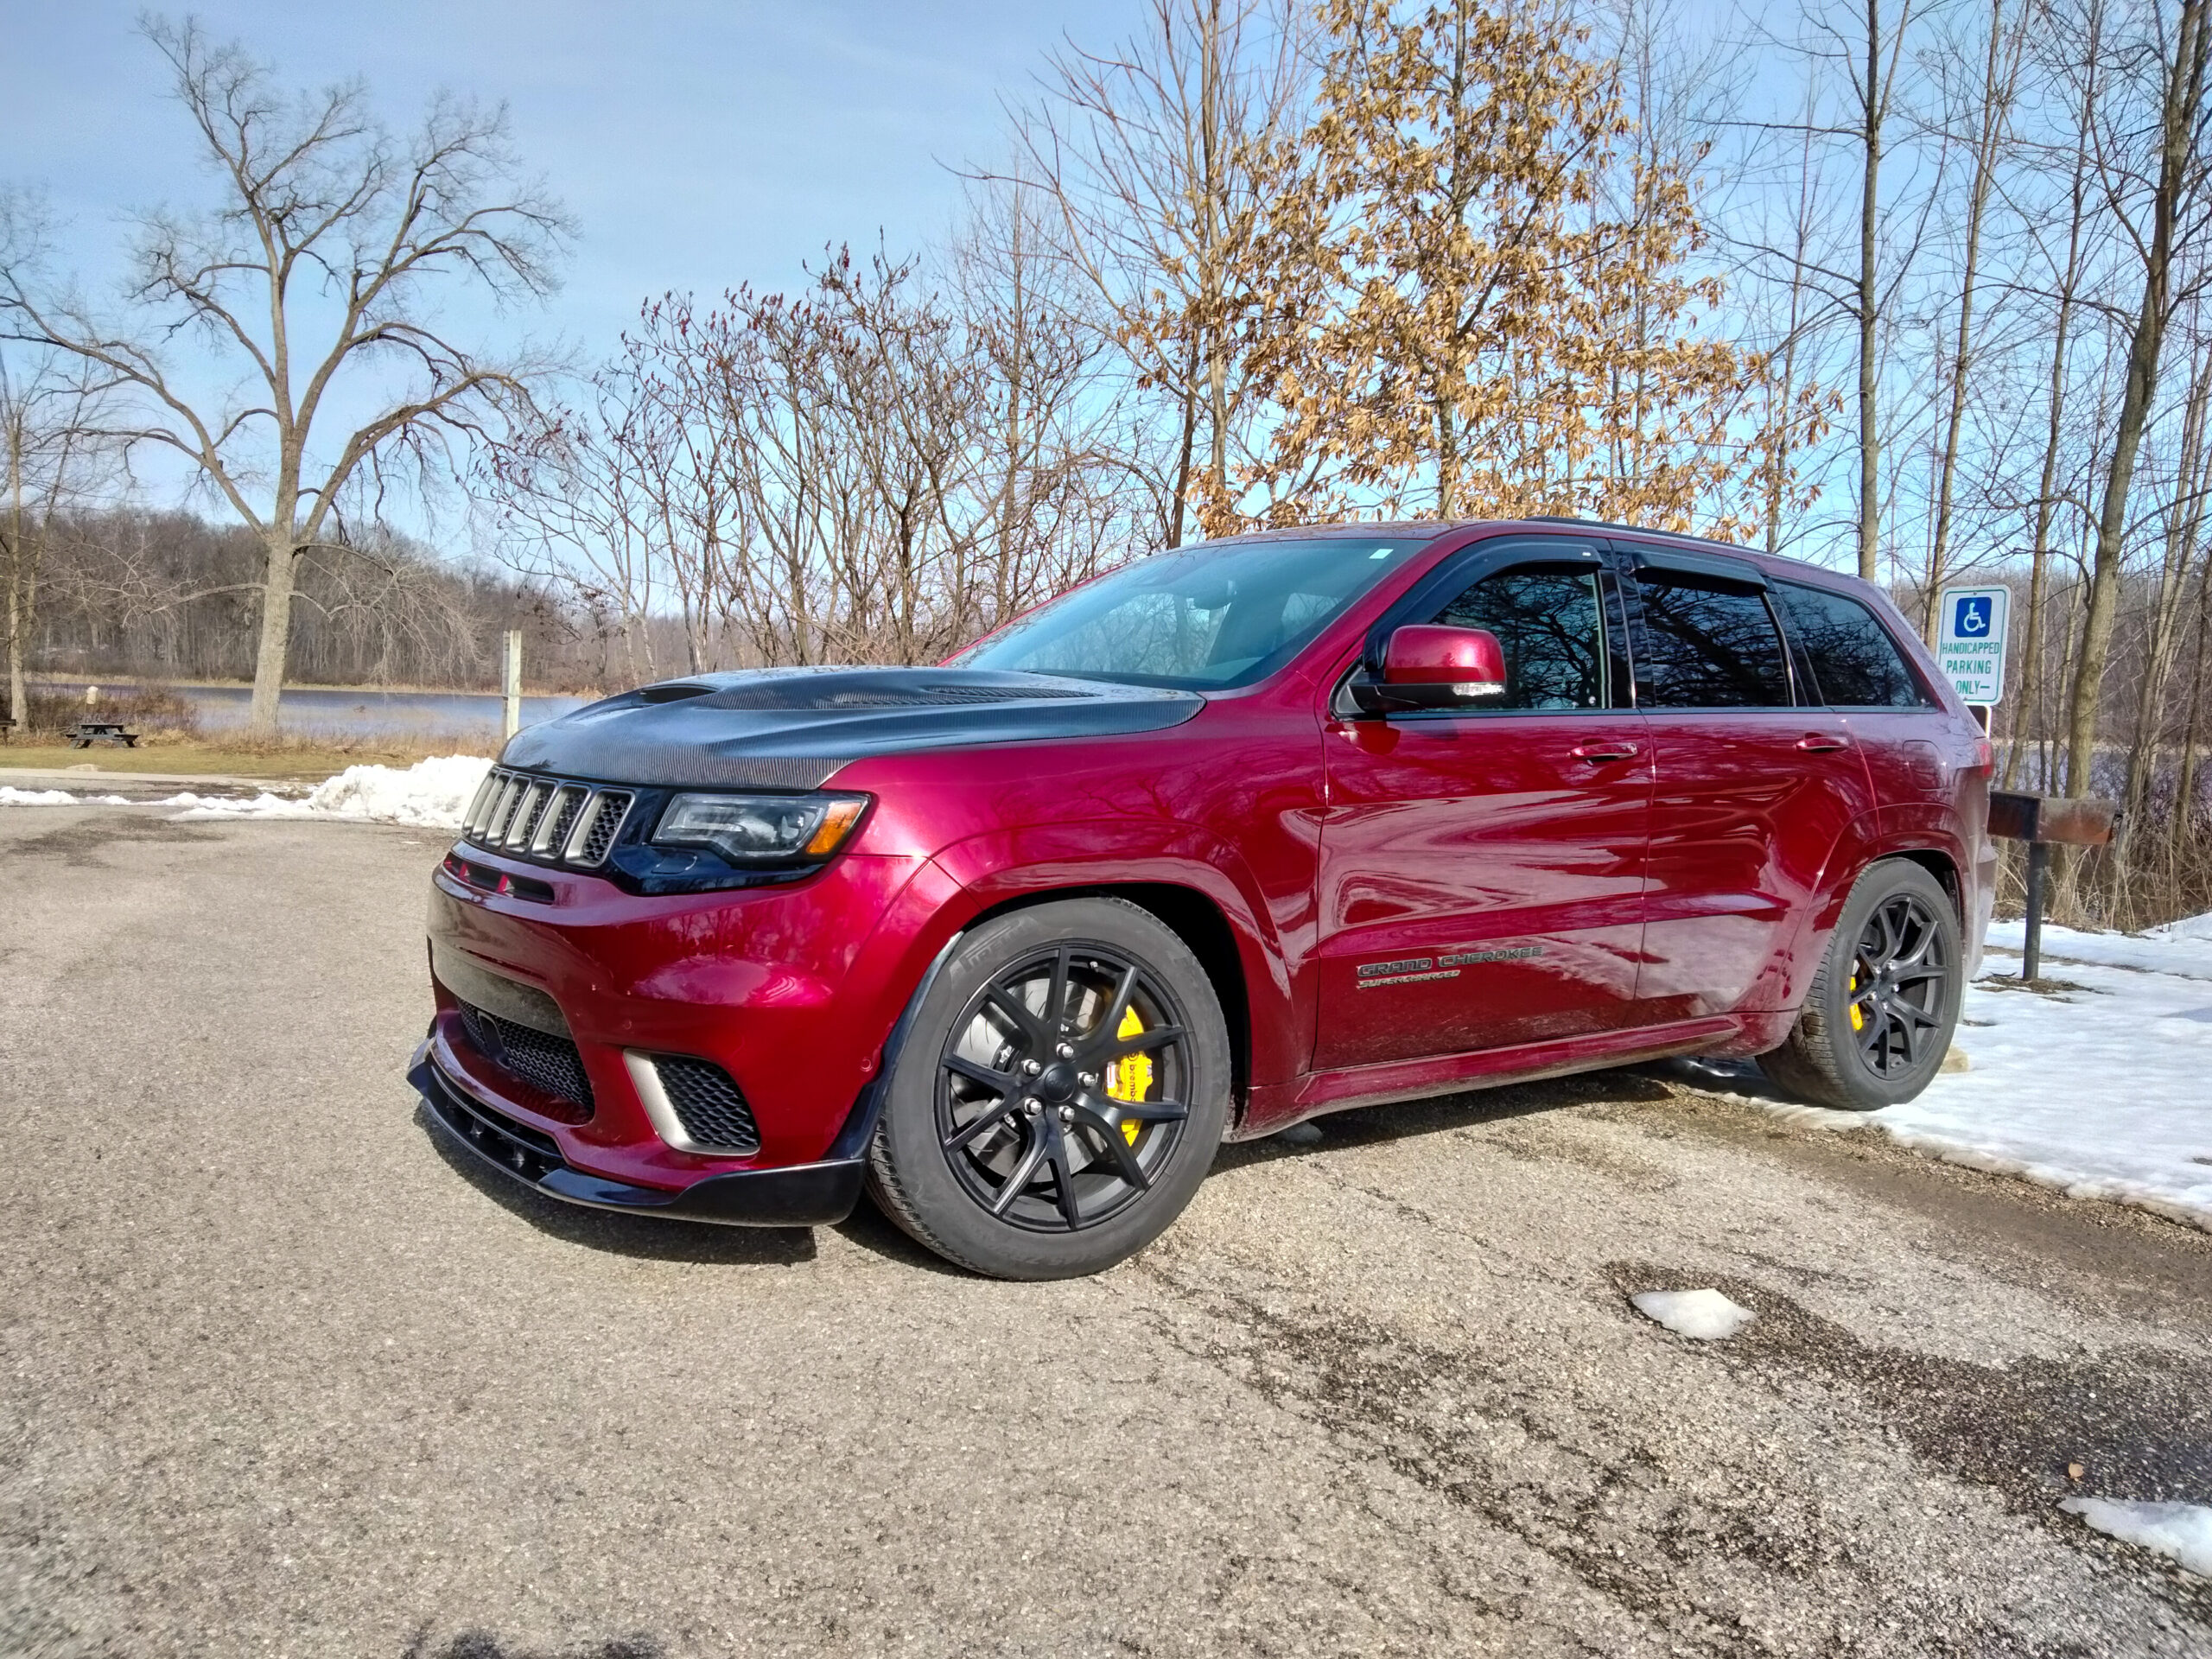 Jeep Grand Cherokee Trackhawk Owner Tests EBC Brakes Racing Components on Road and Track